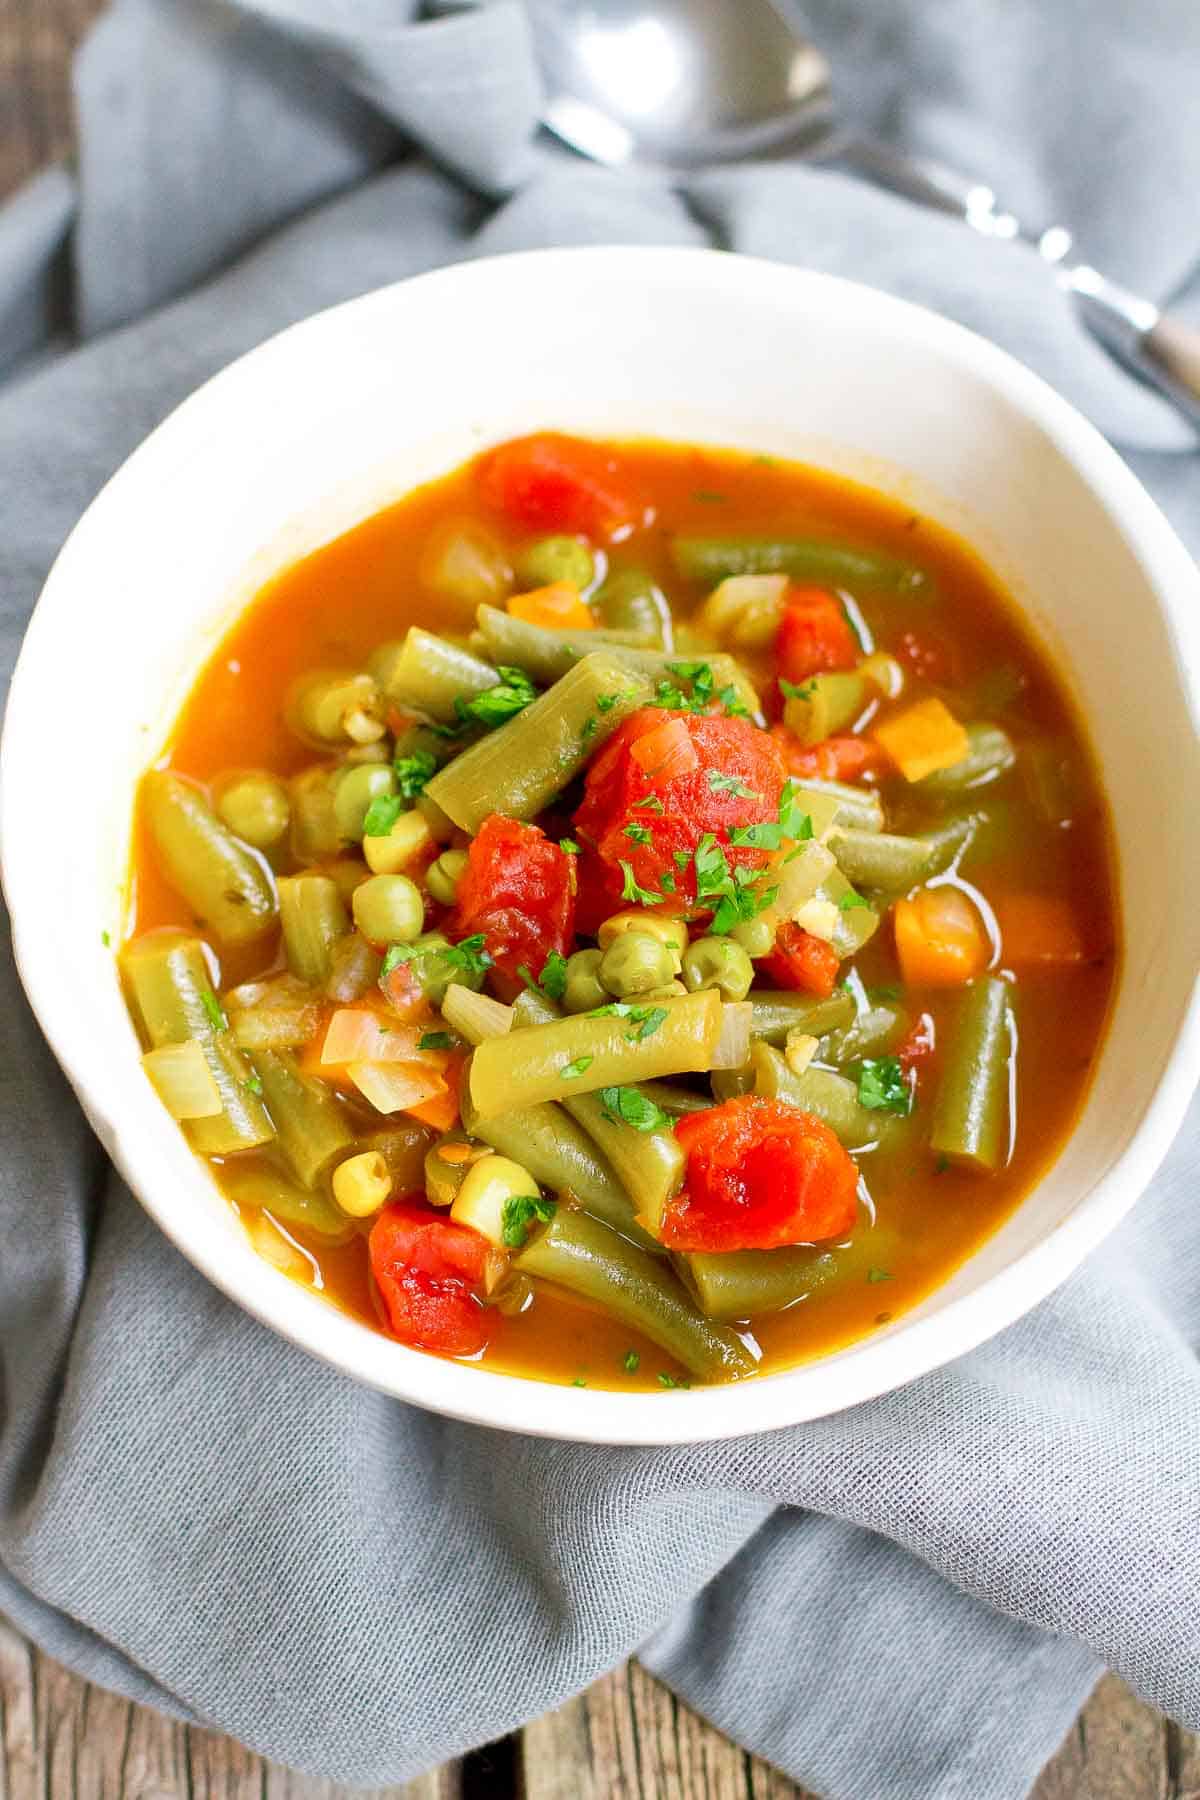 When you need an easy, light lunch, this Instant Pot Vegetable Soup works perfectly! Stovetop instructions also included. | Pressure cooker | Instapot | Vegan | Vegetarian | Plant-based